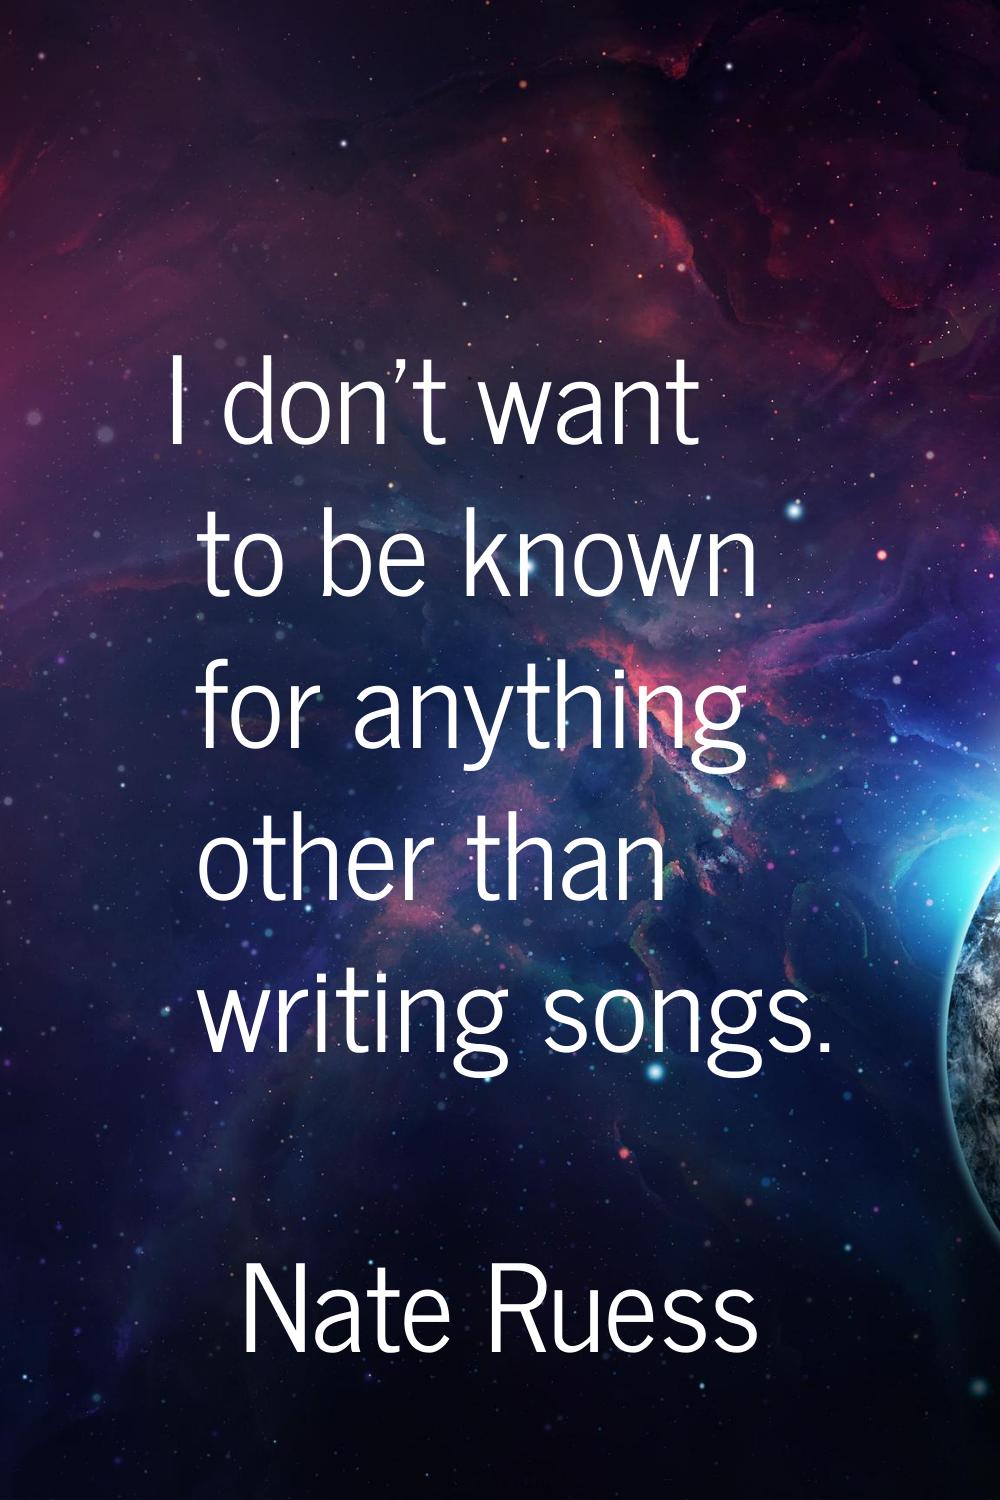 I don't want to be known for anything other than writing songs.